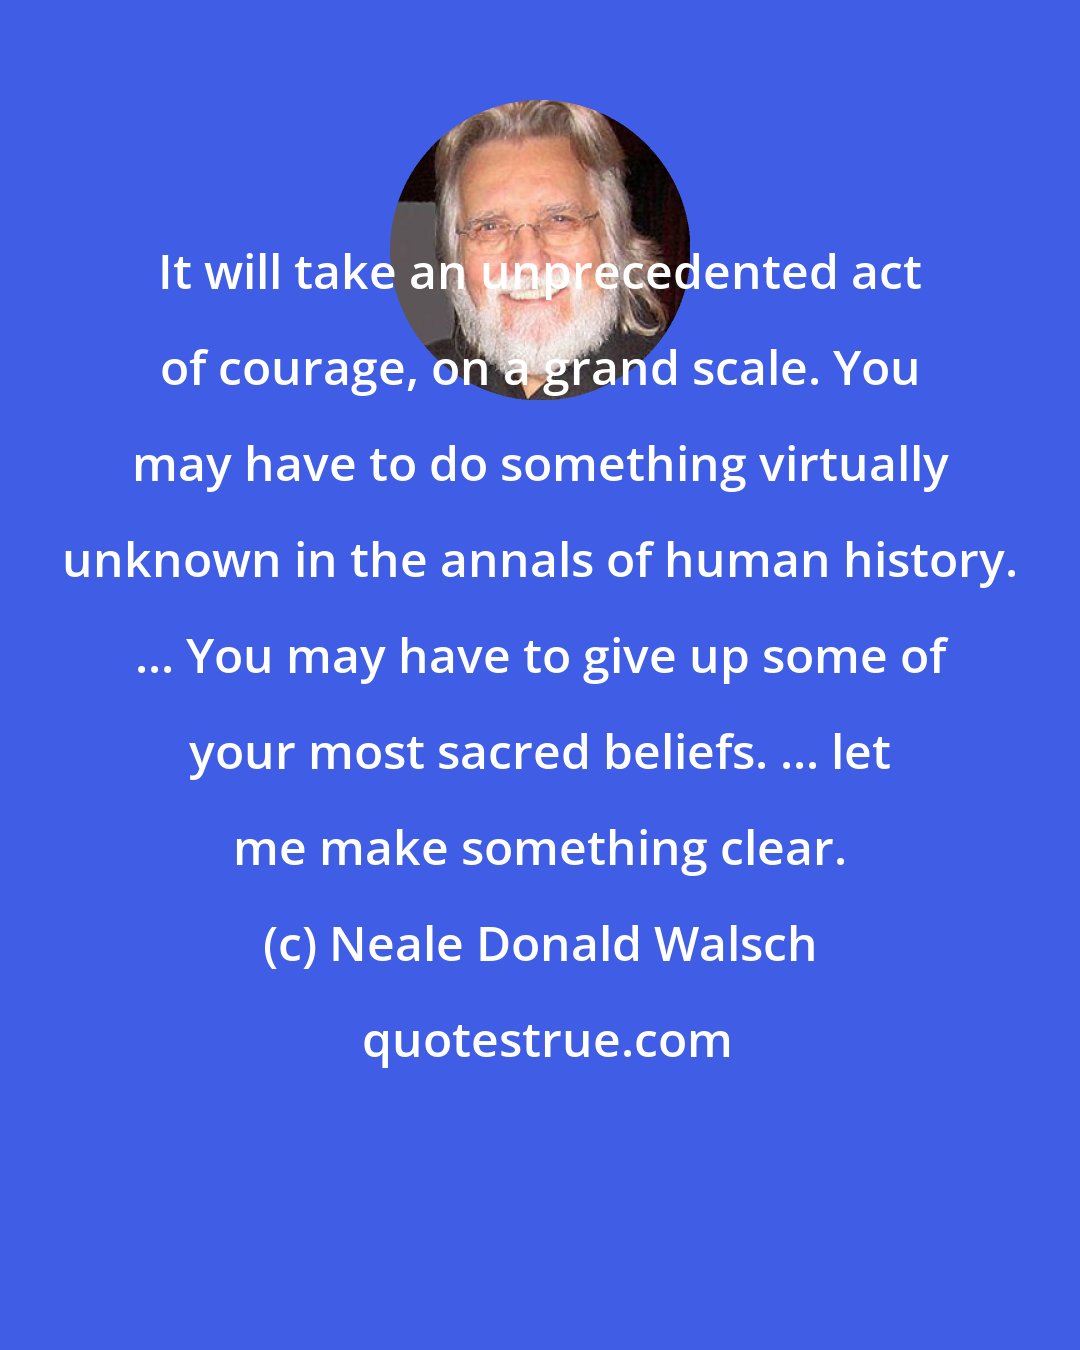 Neale Donald Walsch: It will take an unprecedented act of courage, on a grand scale. You may have to do something virtually unknown in the annals of human history. ... You may have to give up some of your most sacred beliefs. ... let me make something clear.